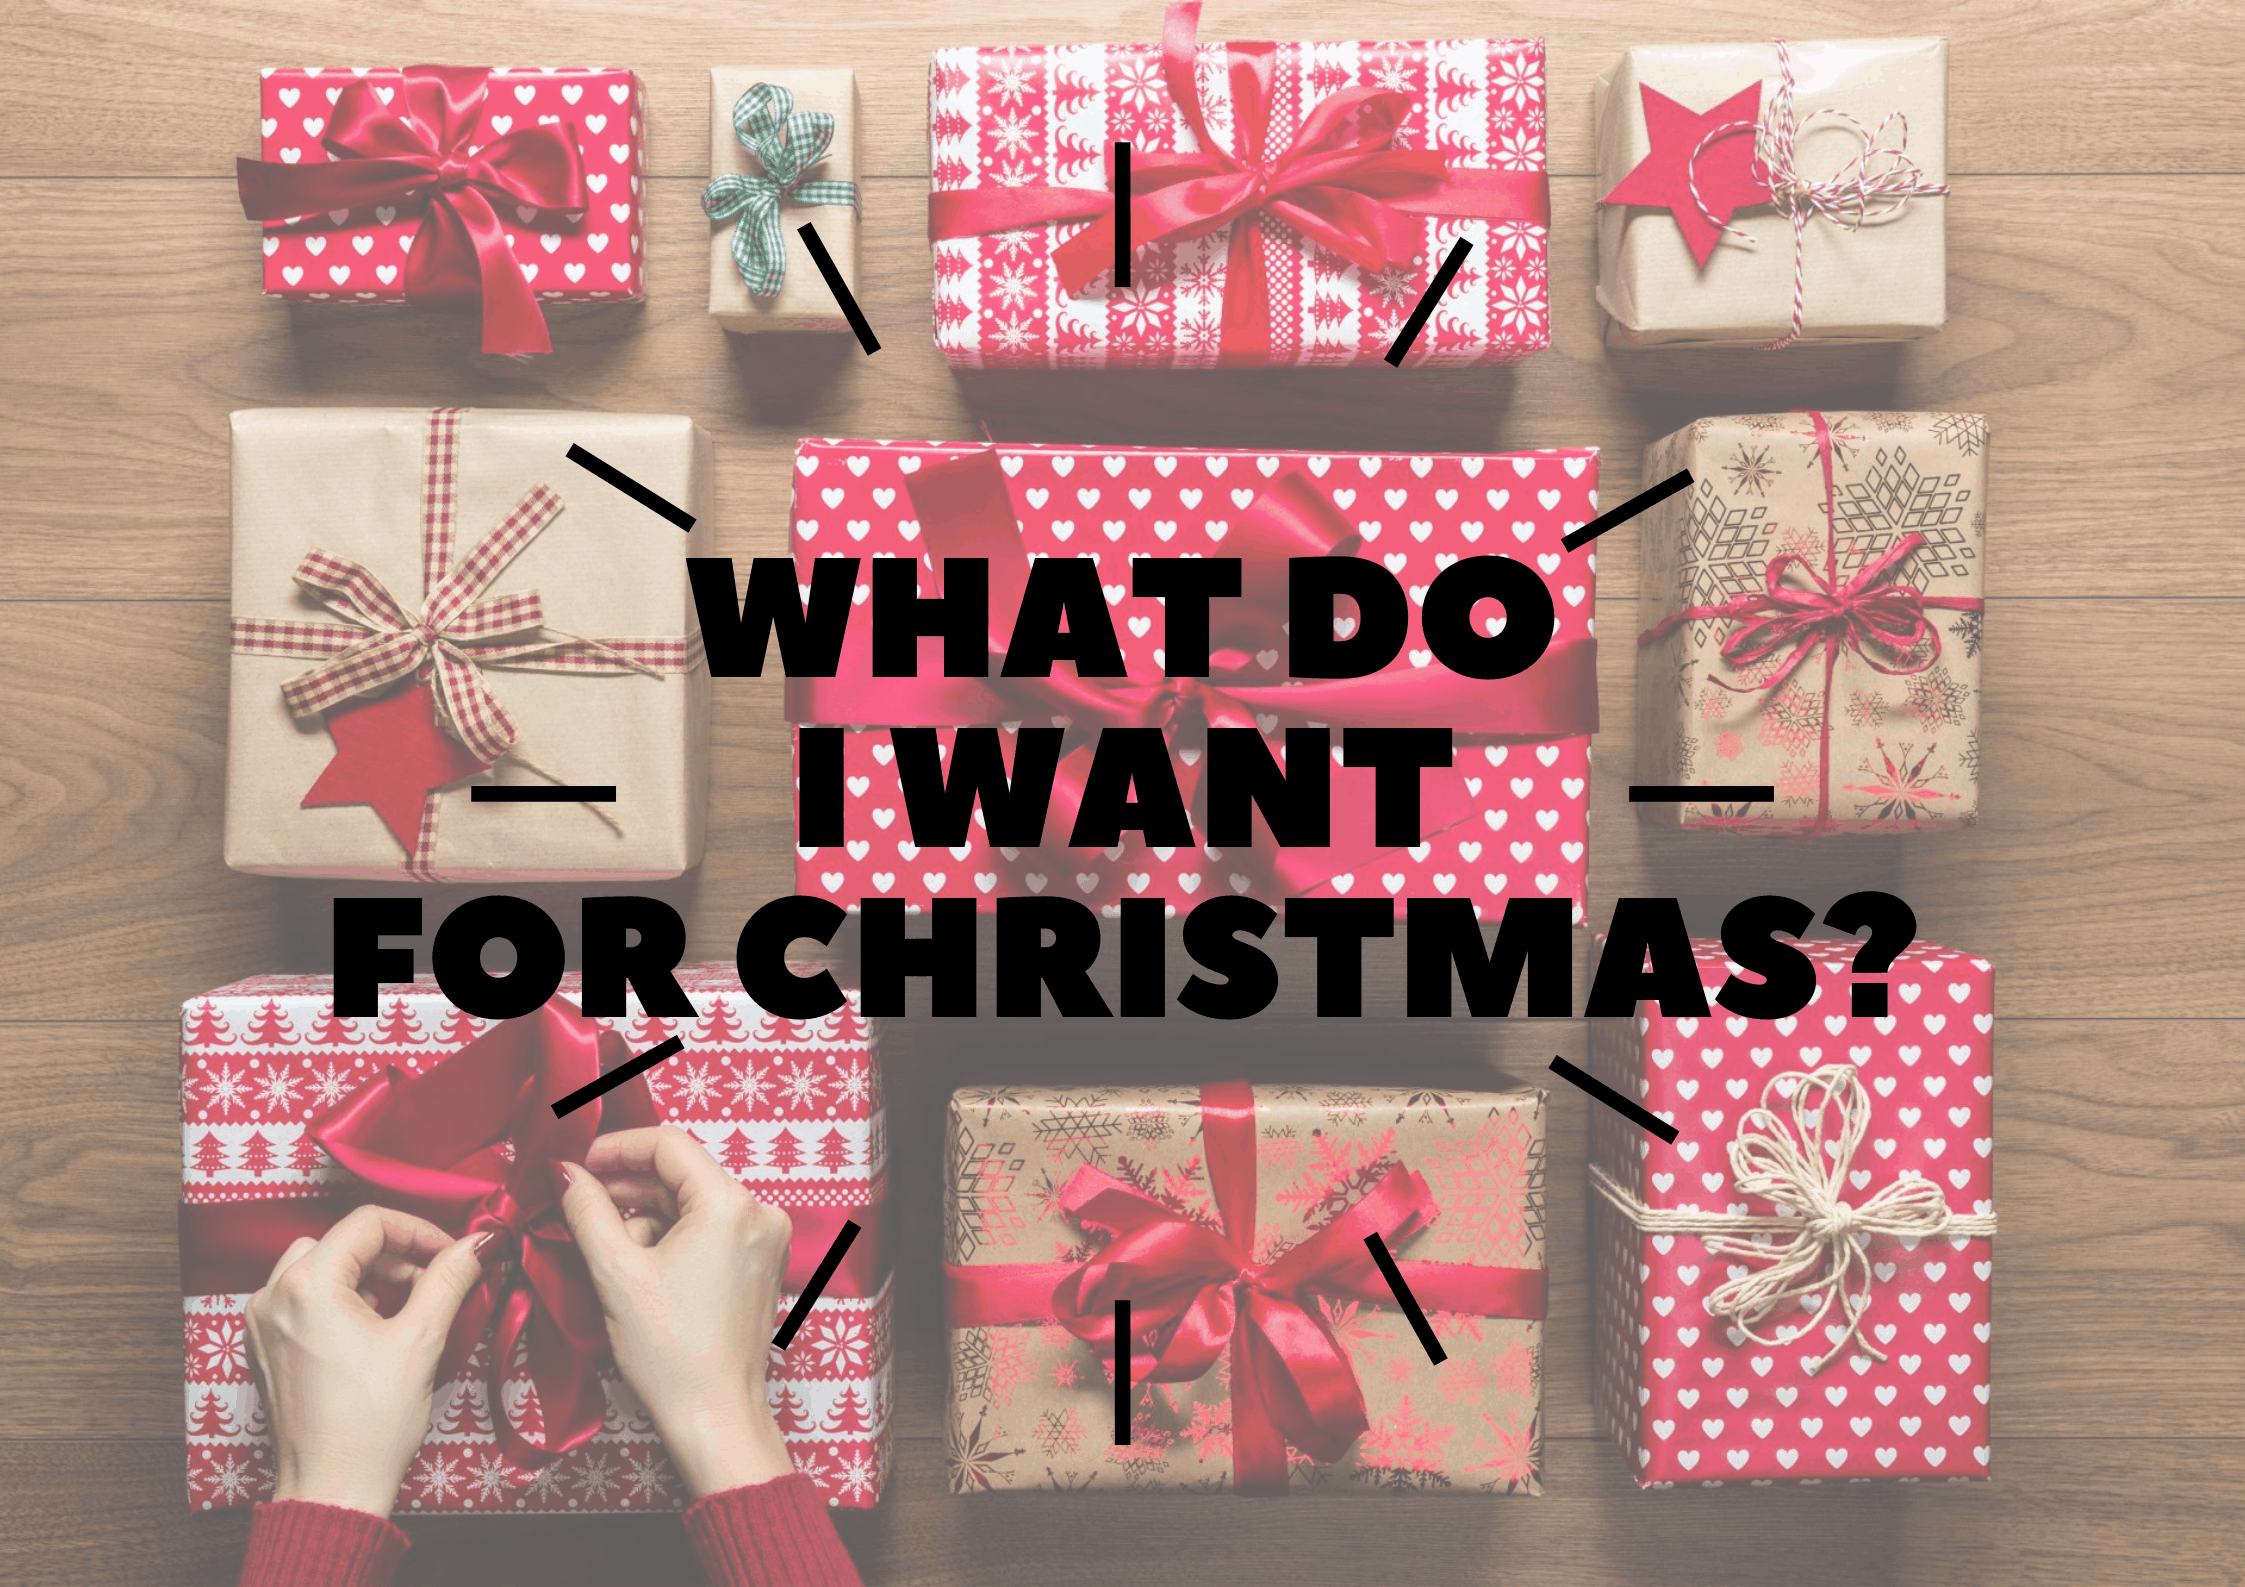 What Do I Want For Christmas This Year? Gift Ideas for Everyone